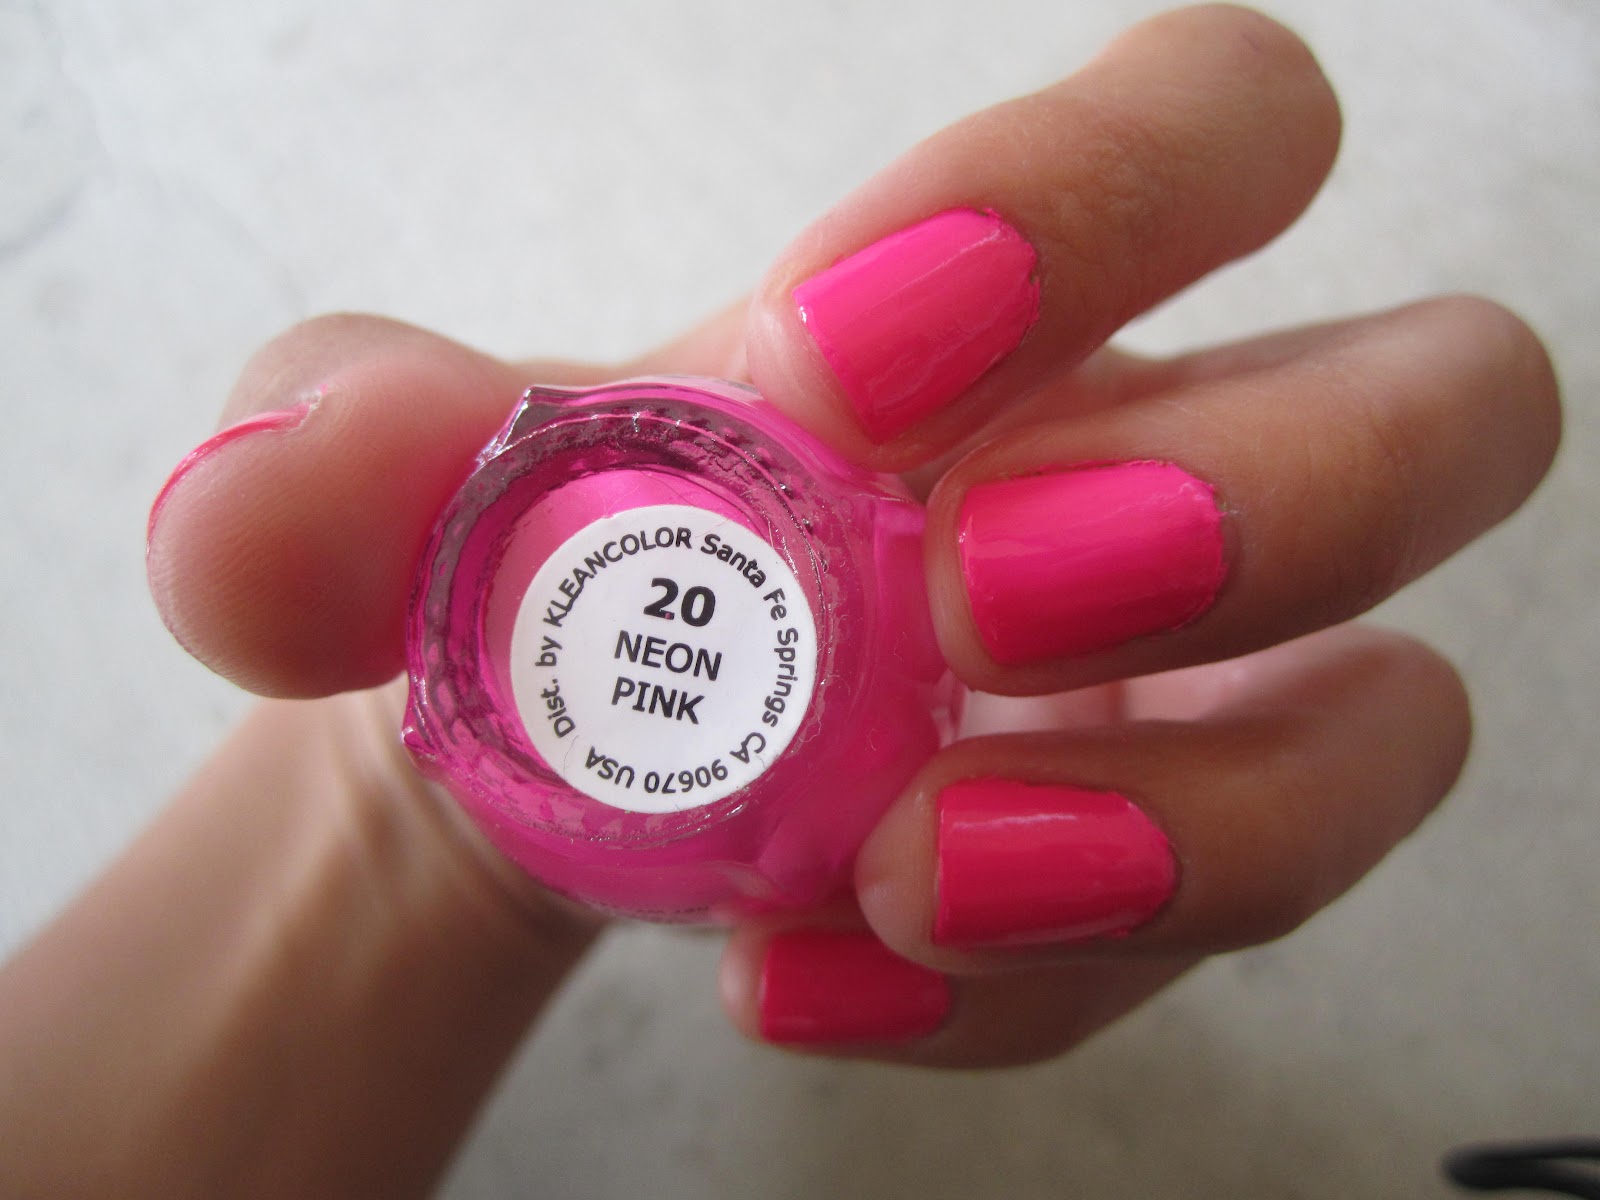 Neon Pink Nail Design Ideas on Tumblr - wide 7